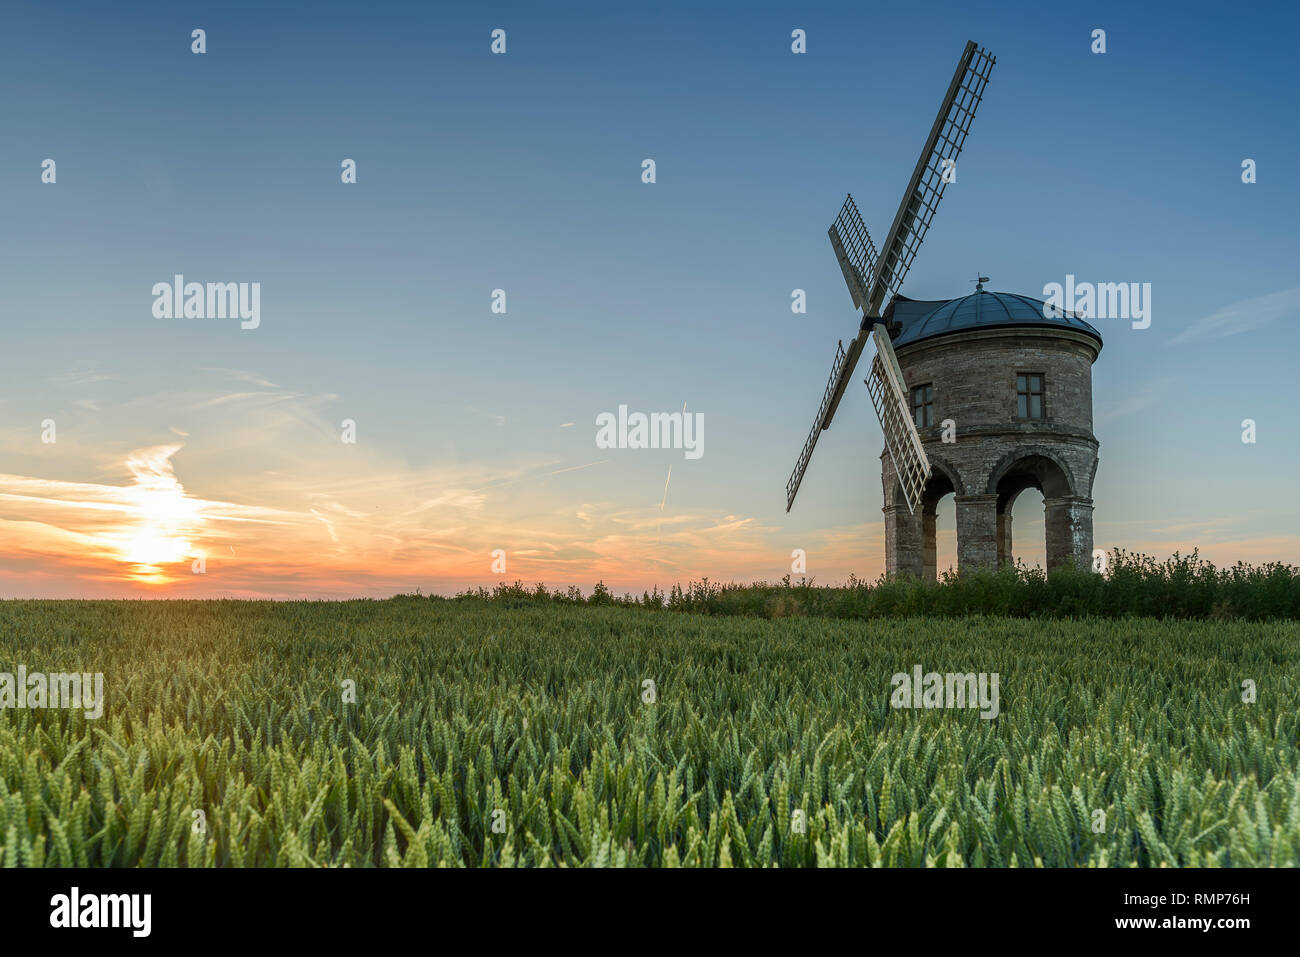 Chesterton Windmill near Leamington Spa, Warwickshire, England, at sunset on a summers evening Stock Photo